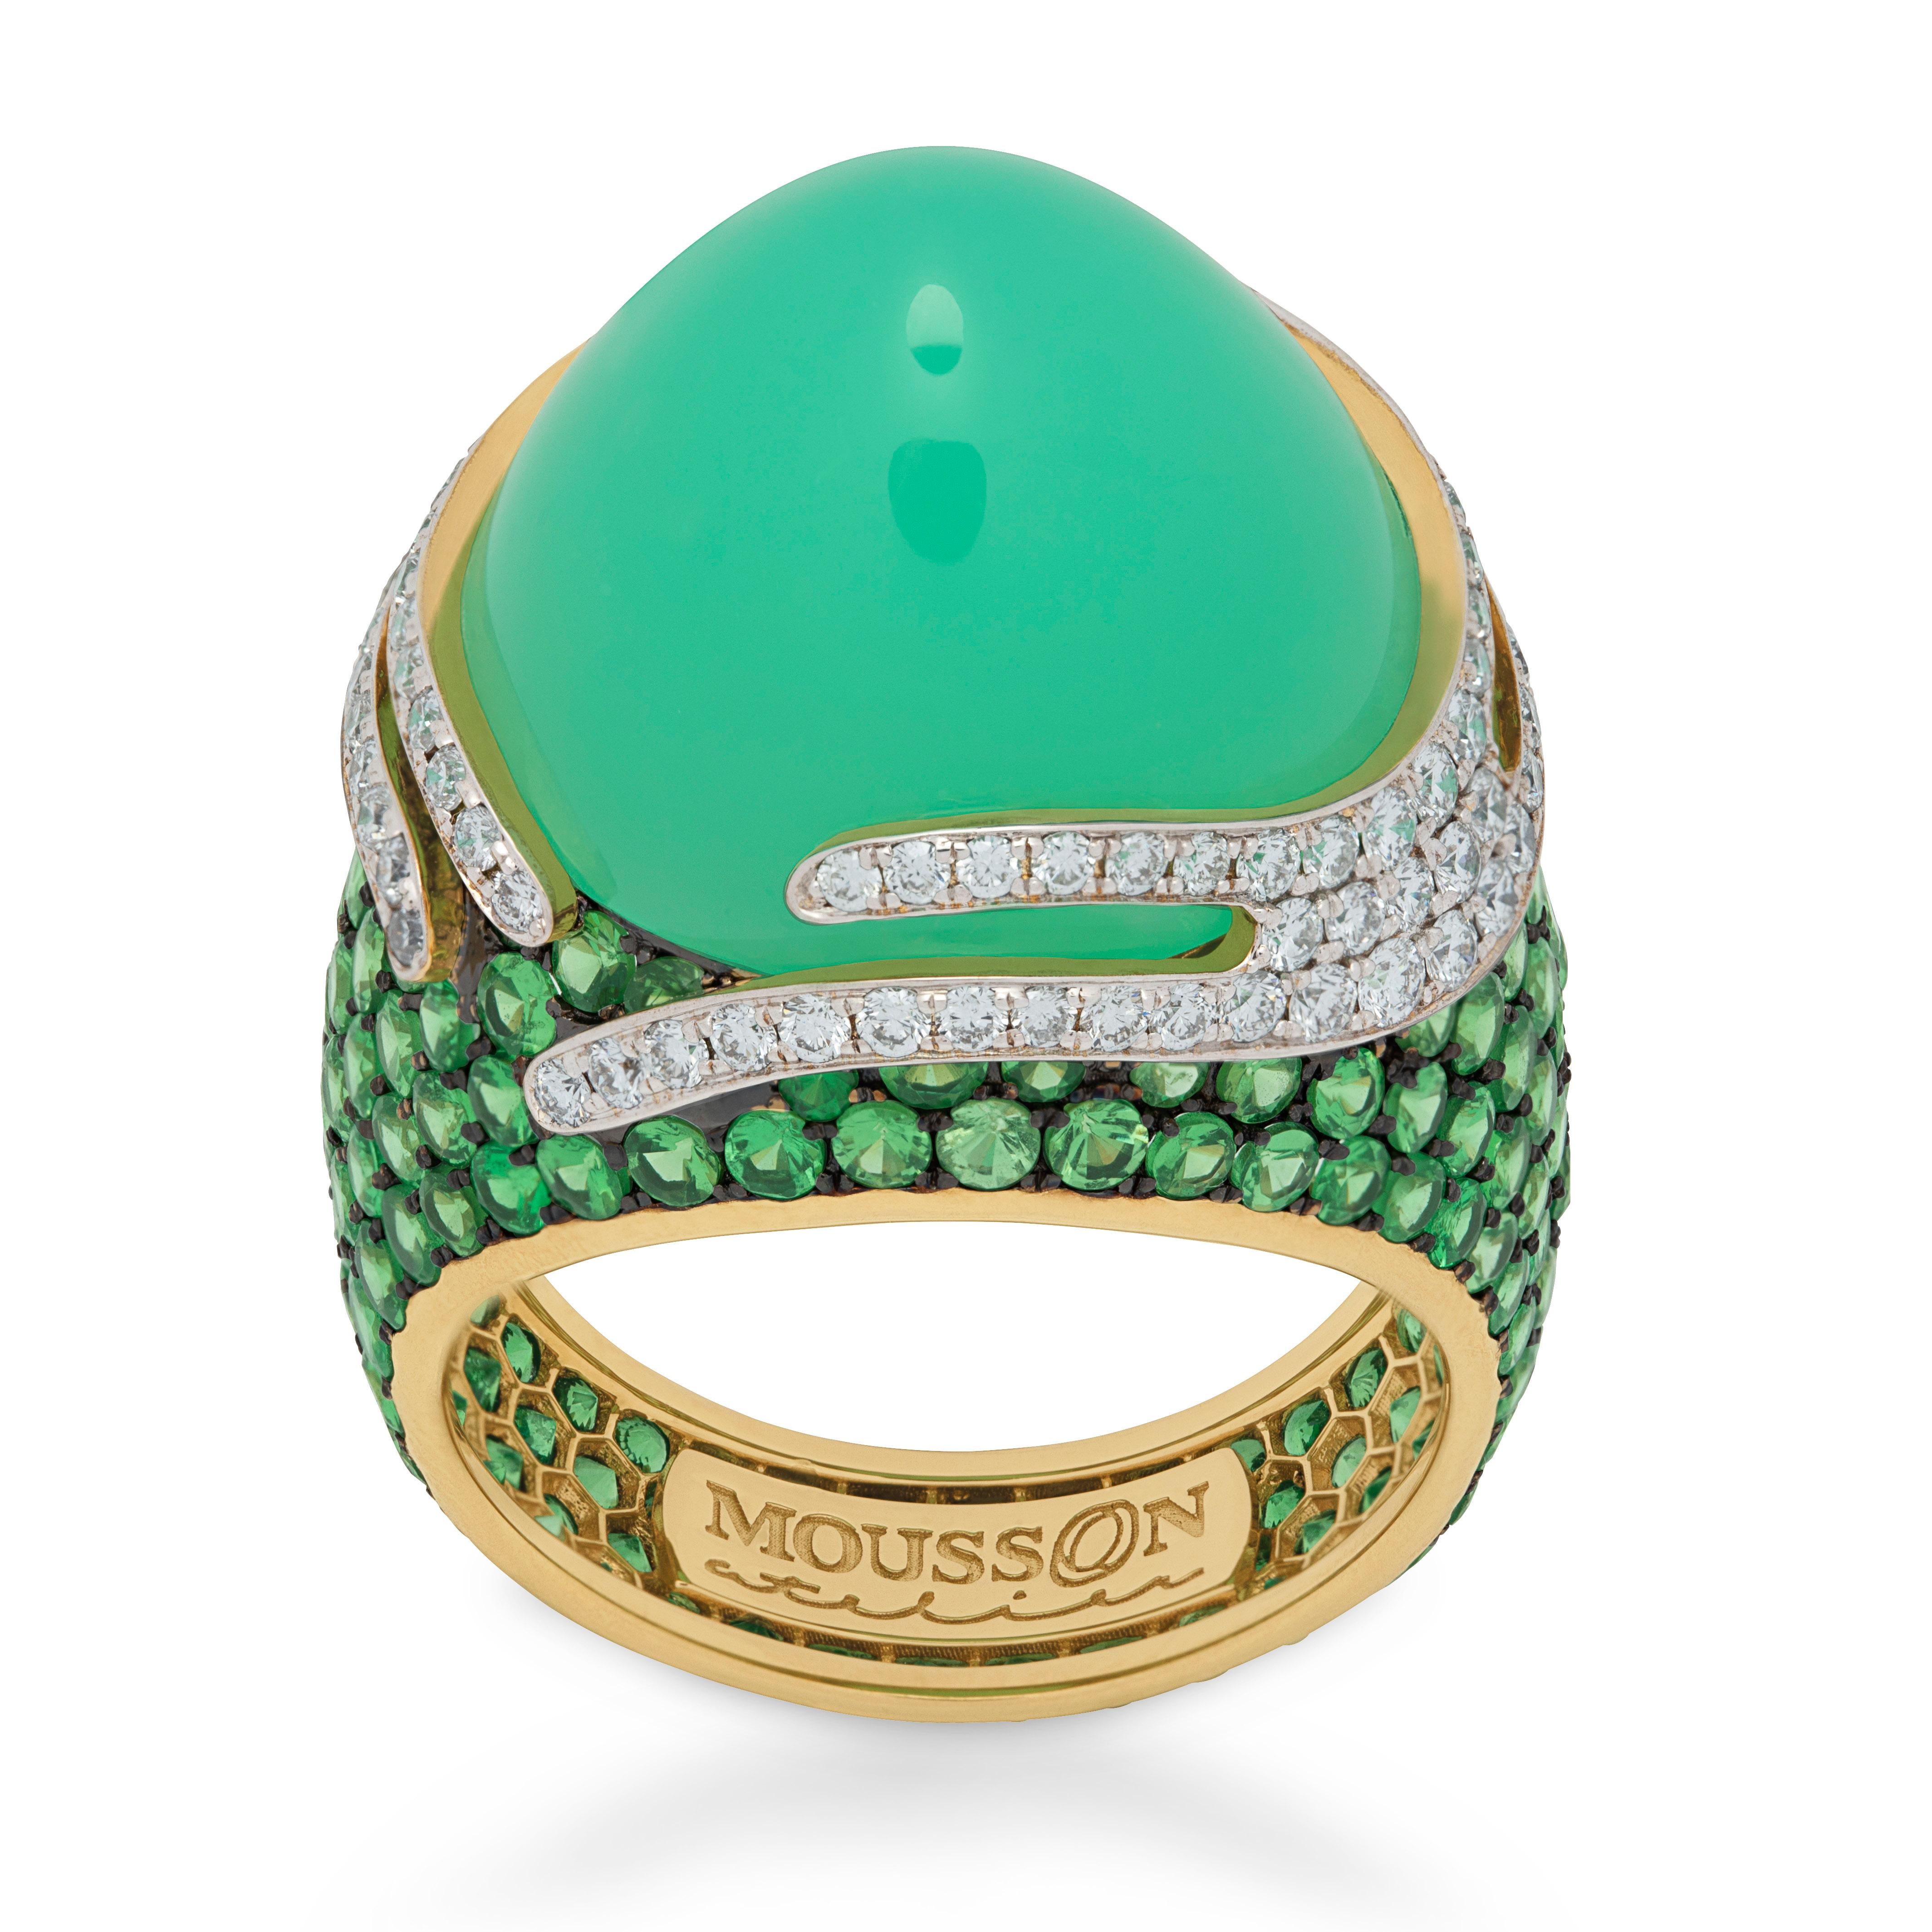 Chrysoprase 21.96 Carat Tsavorites Diamonds 18 Karat Gold Fuji Ring
Series of these Rings isn't called Fuji for nothing, since the inspiration for the creation of these products came to us exactly from the contemplation of this majestic mountain.